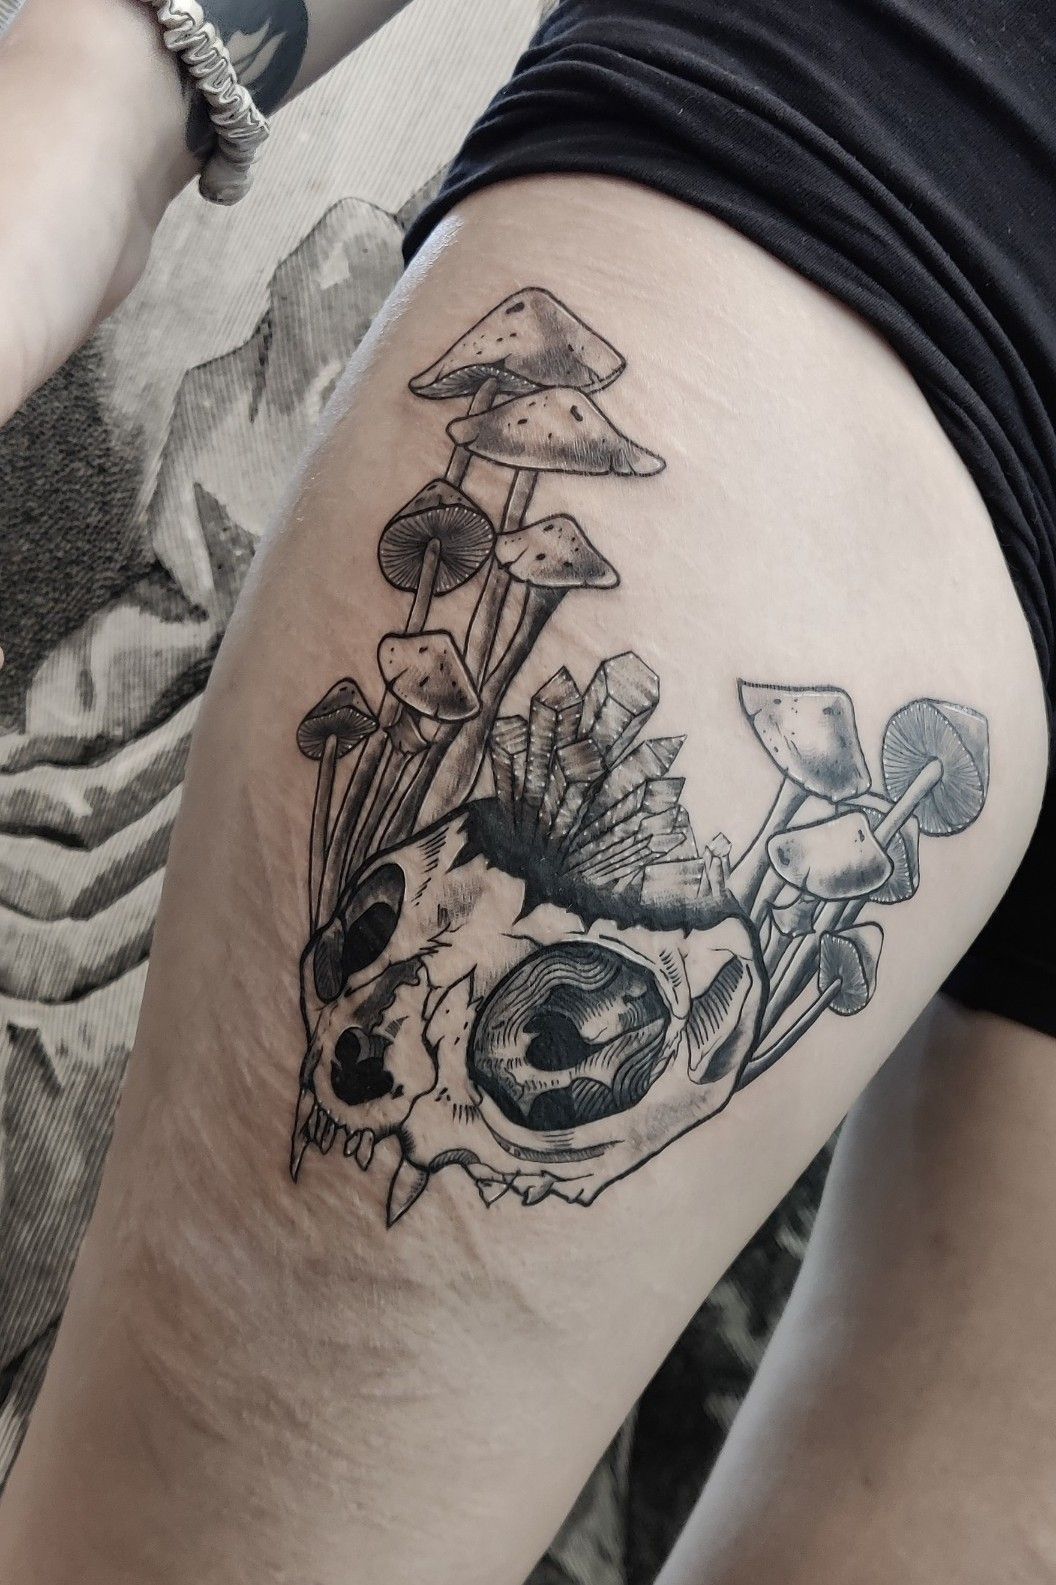 Cat skull and mushrooms done by Matteo at Giahi Zurich  rtattoos